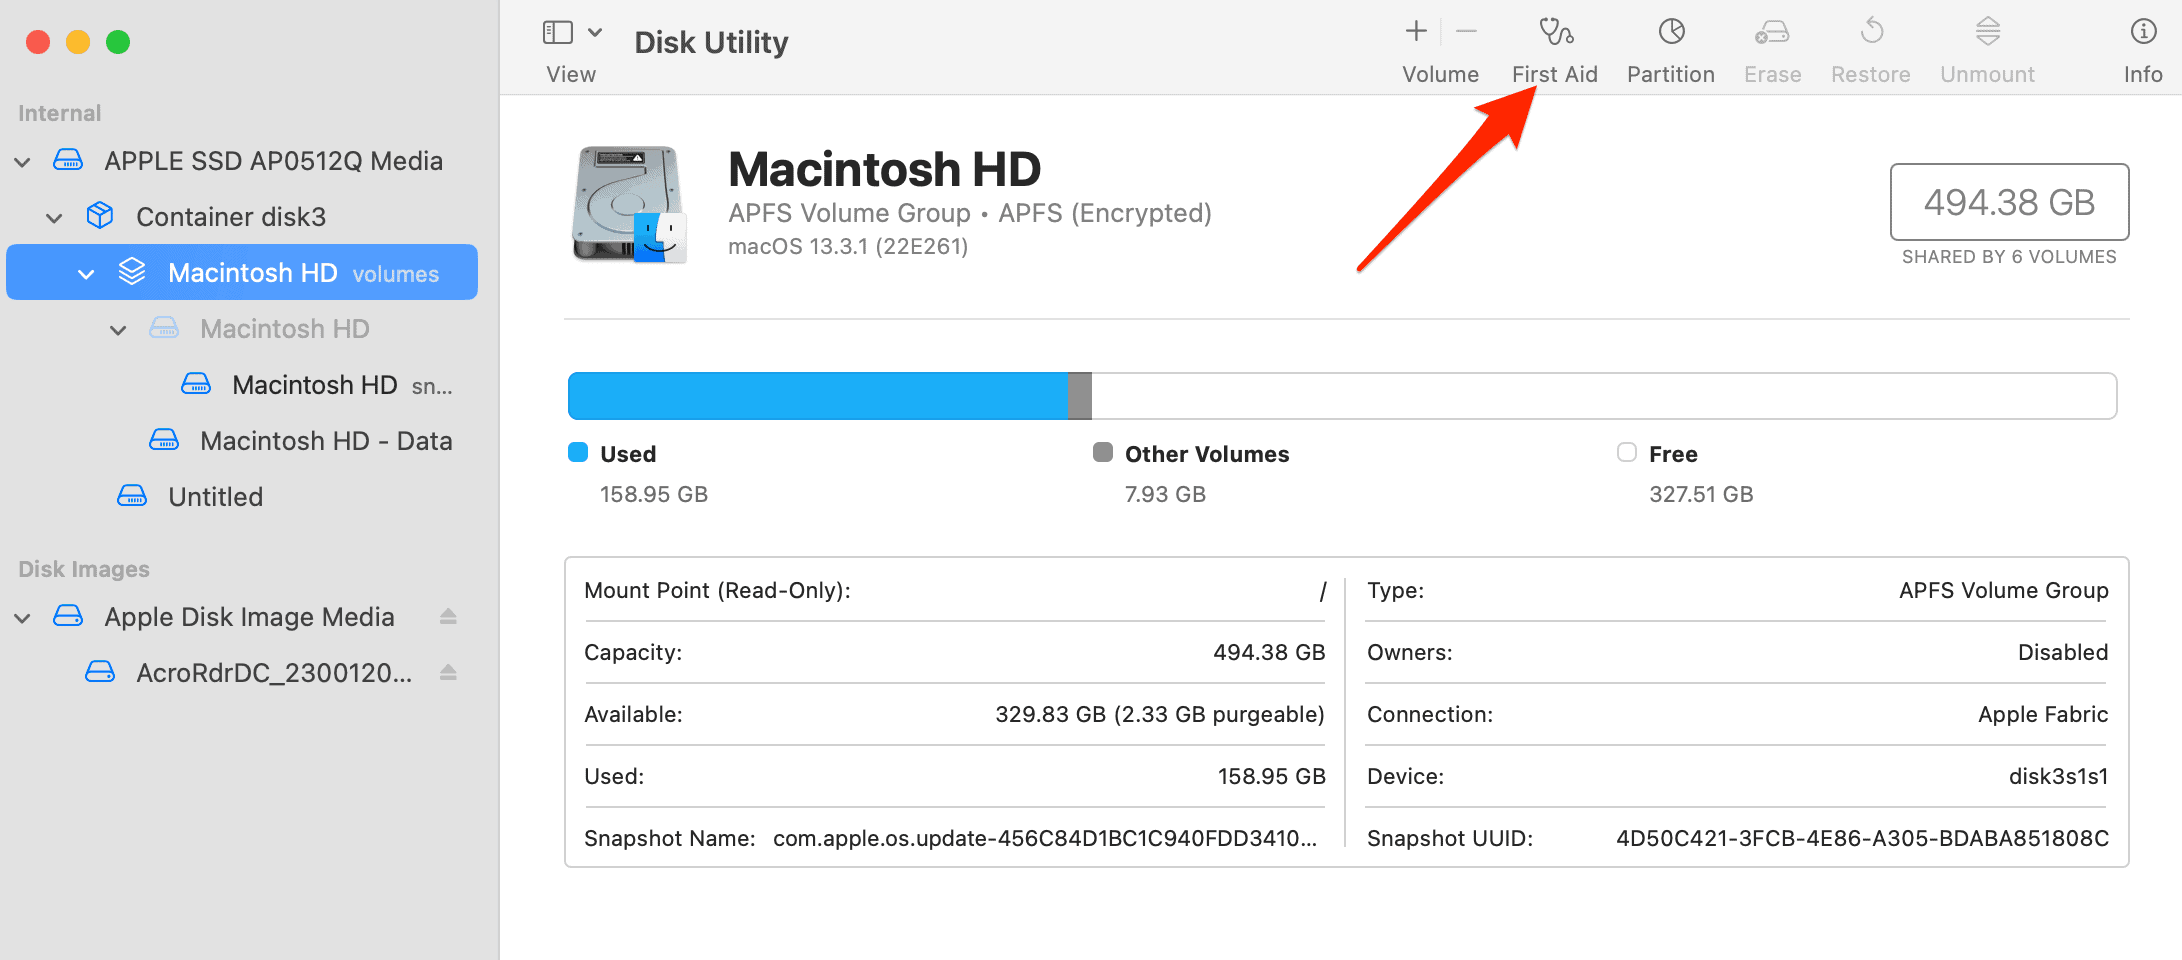 first aid button in disk utility